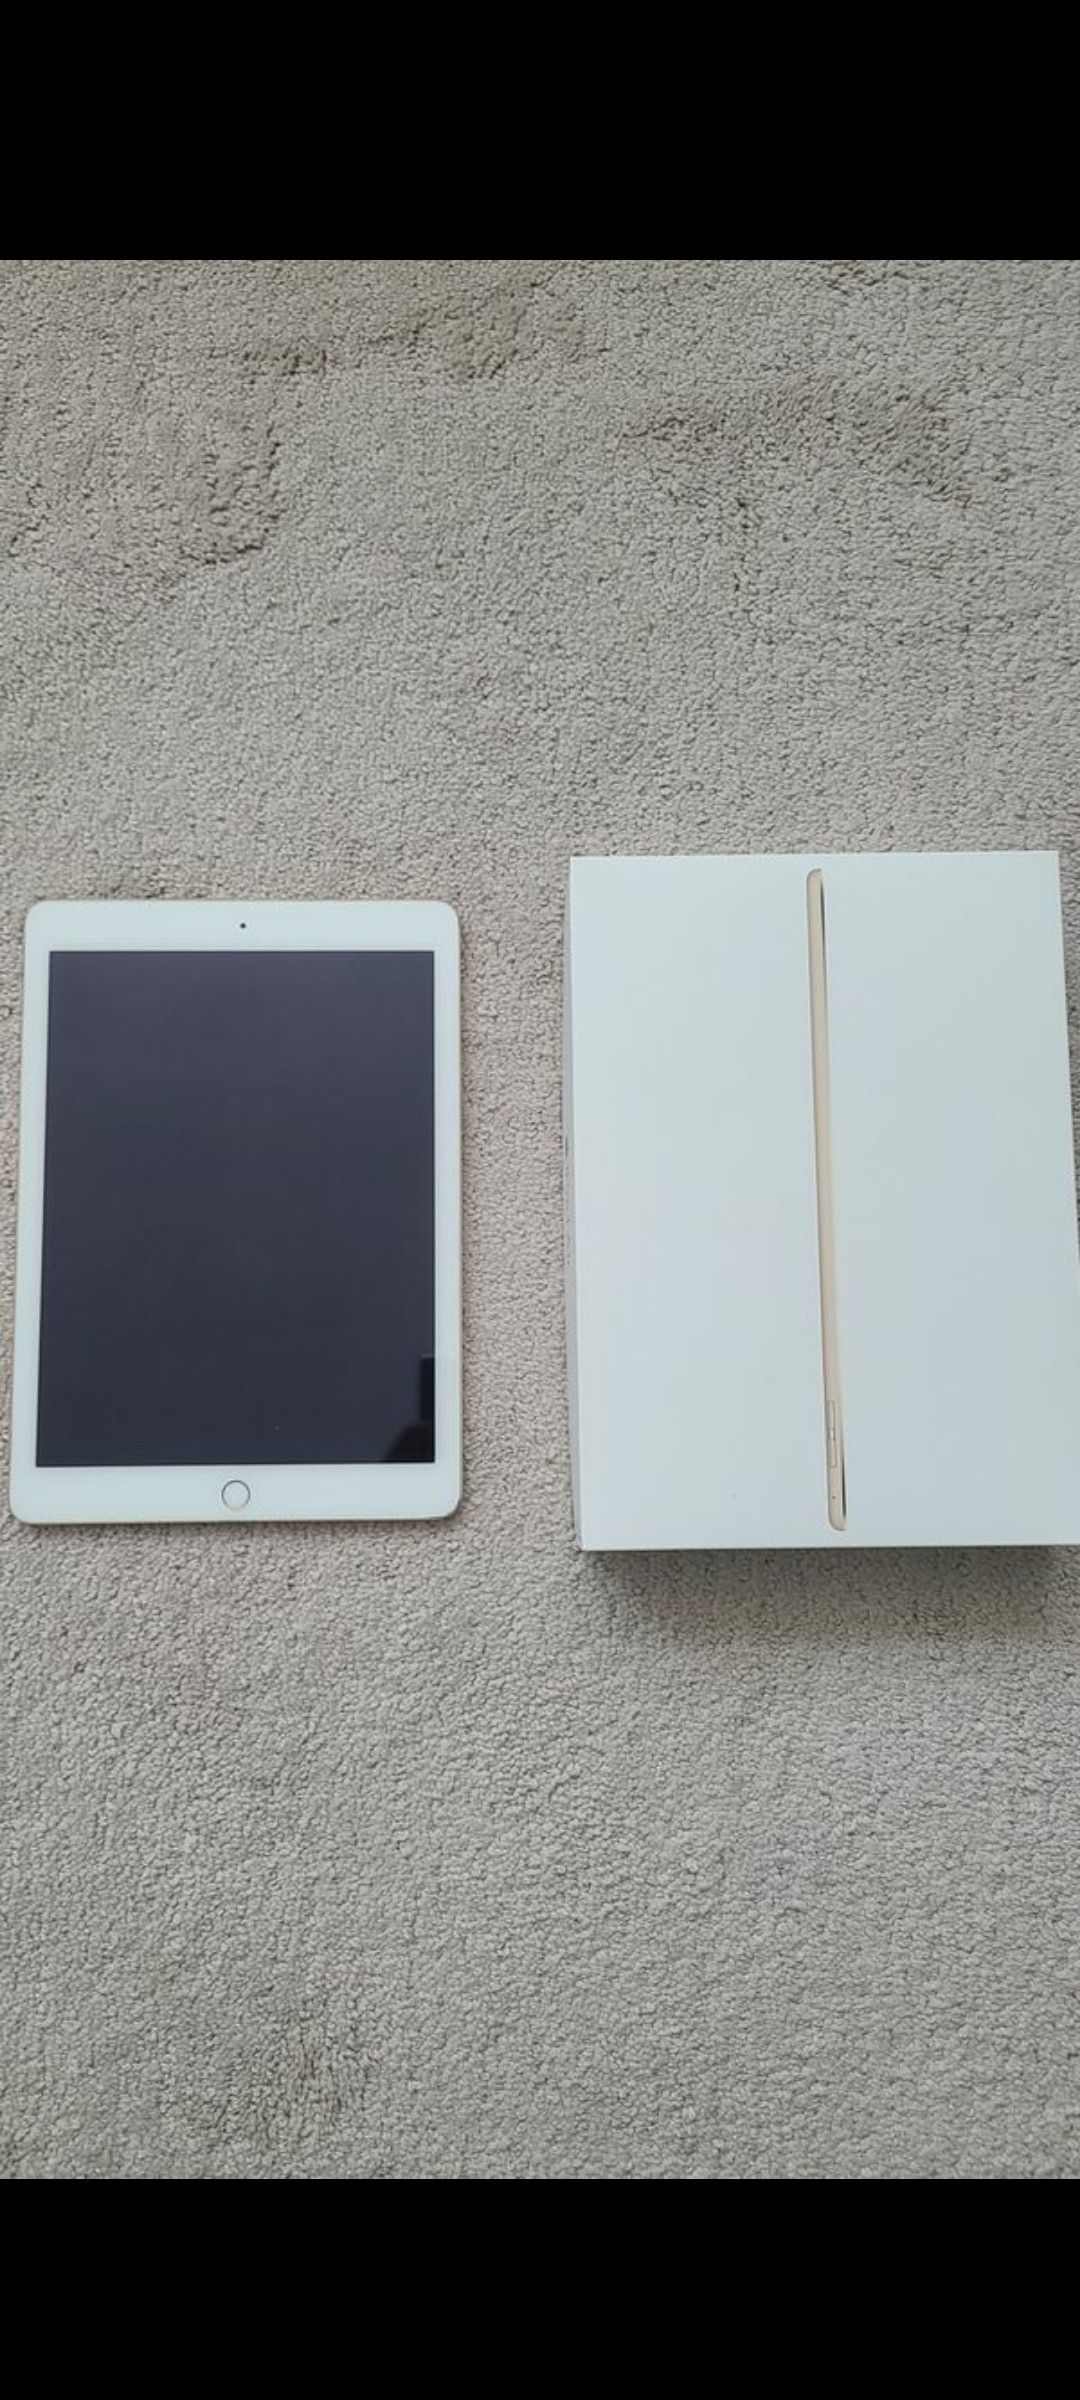 Ipad air 2, 32 gb, wifi, perfect condition works perfectly no scratches, price negotiable